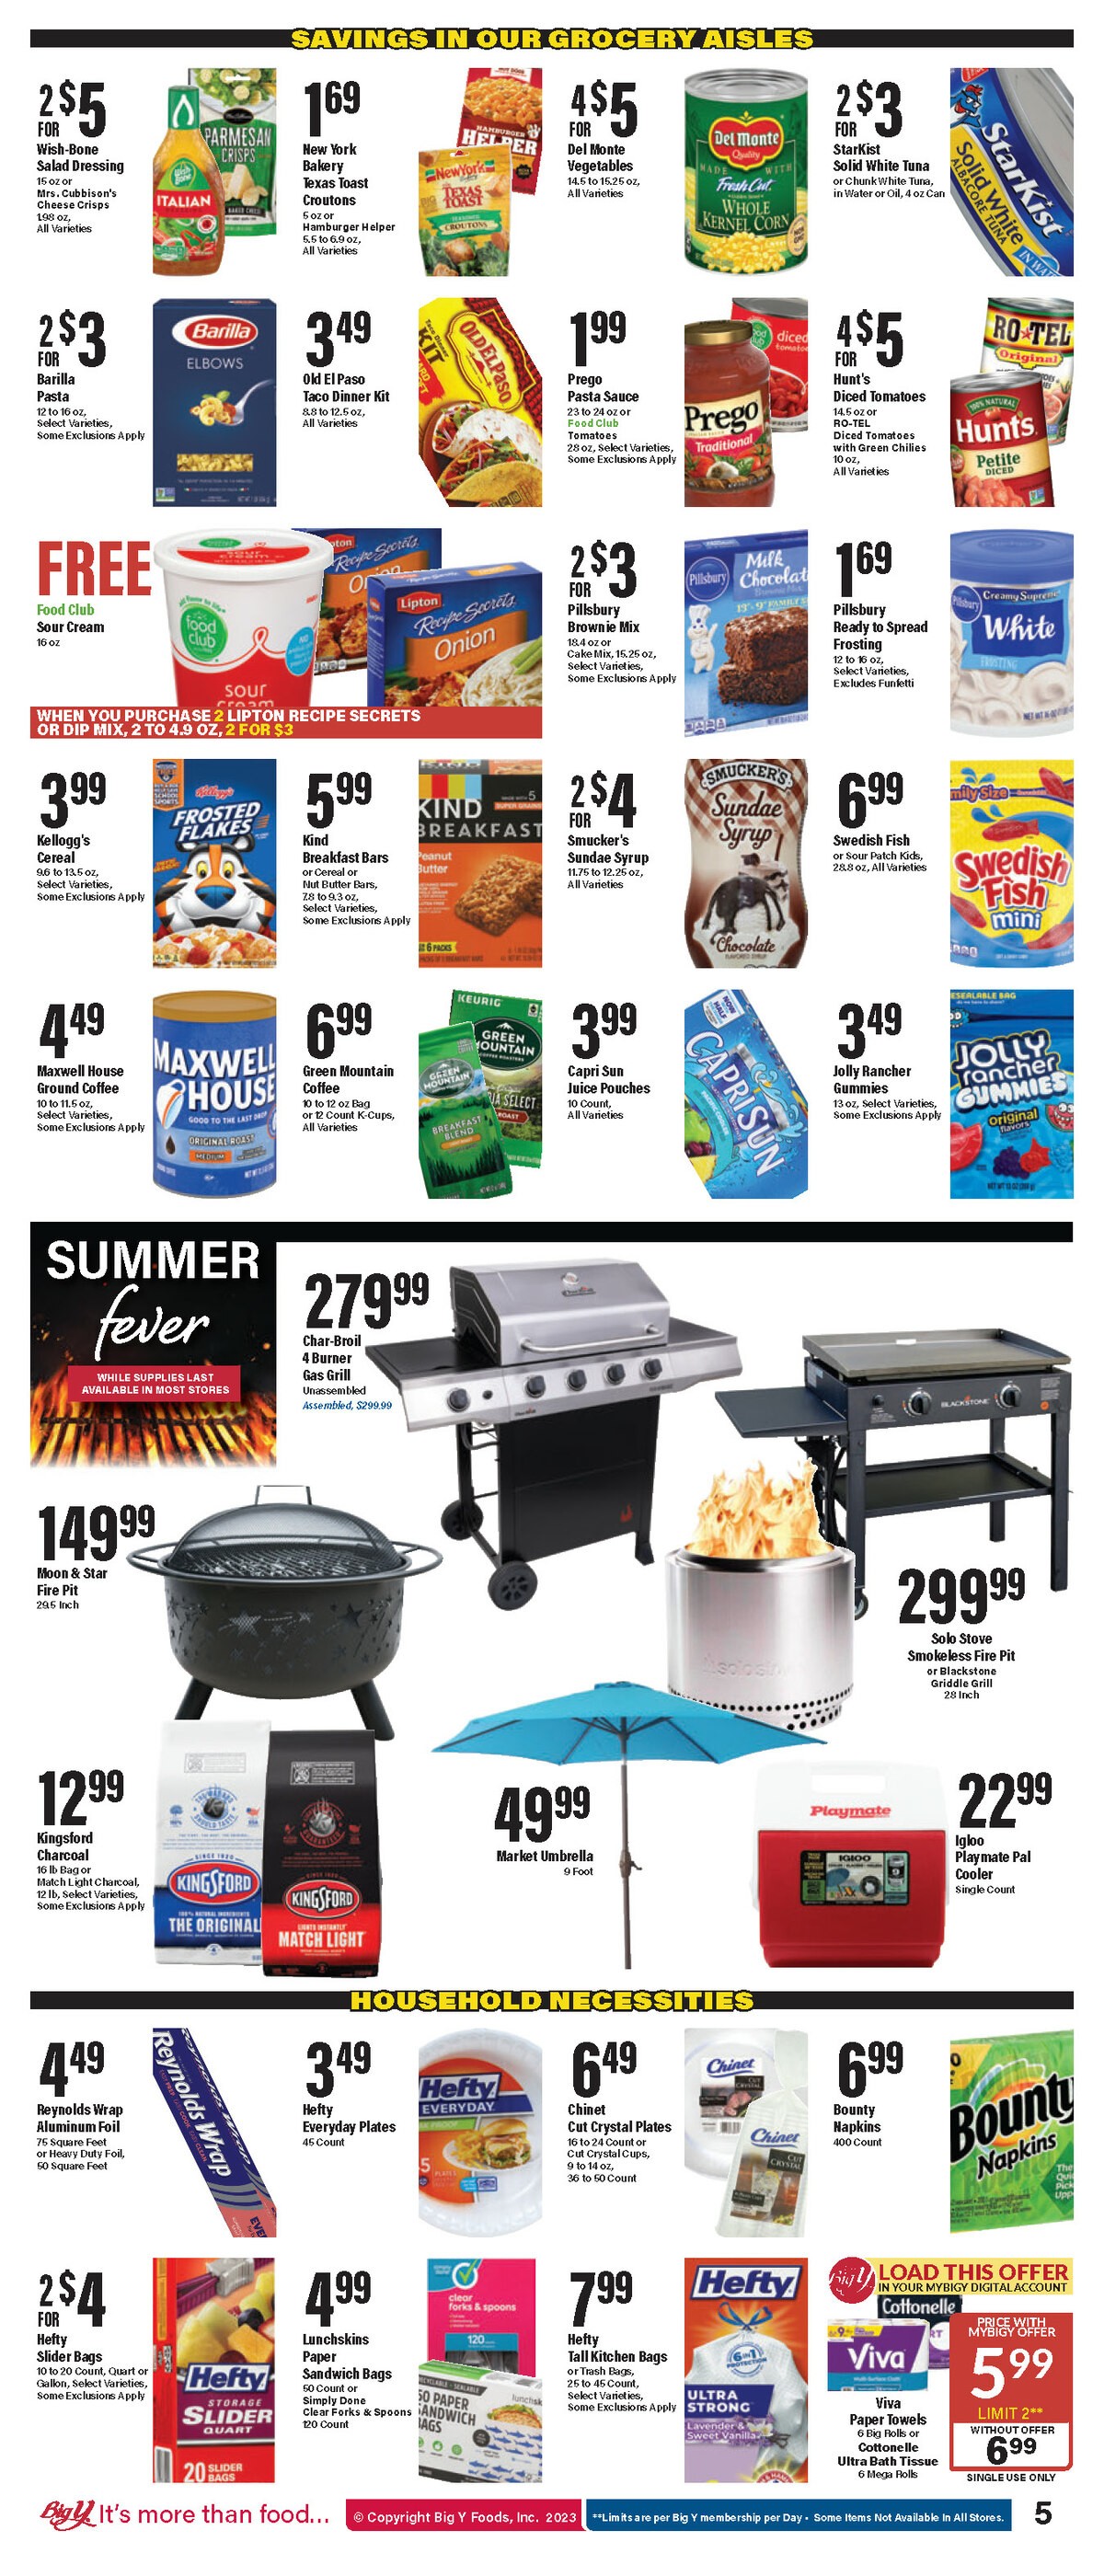 Big Y Weekly Ad from May 18